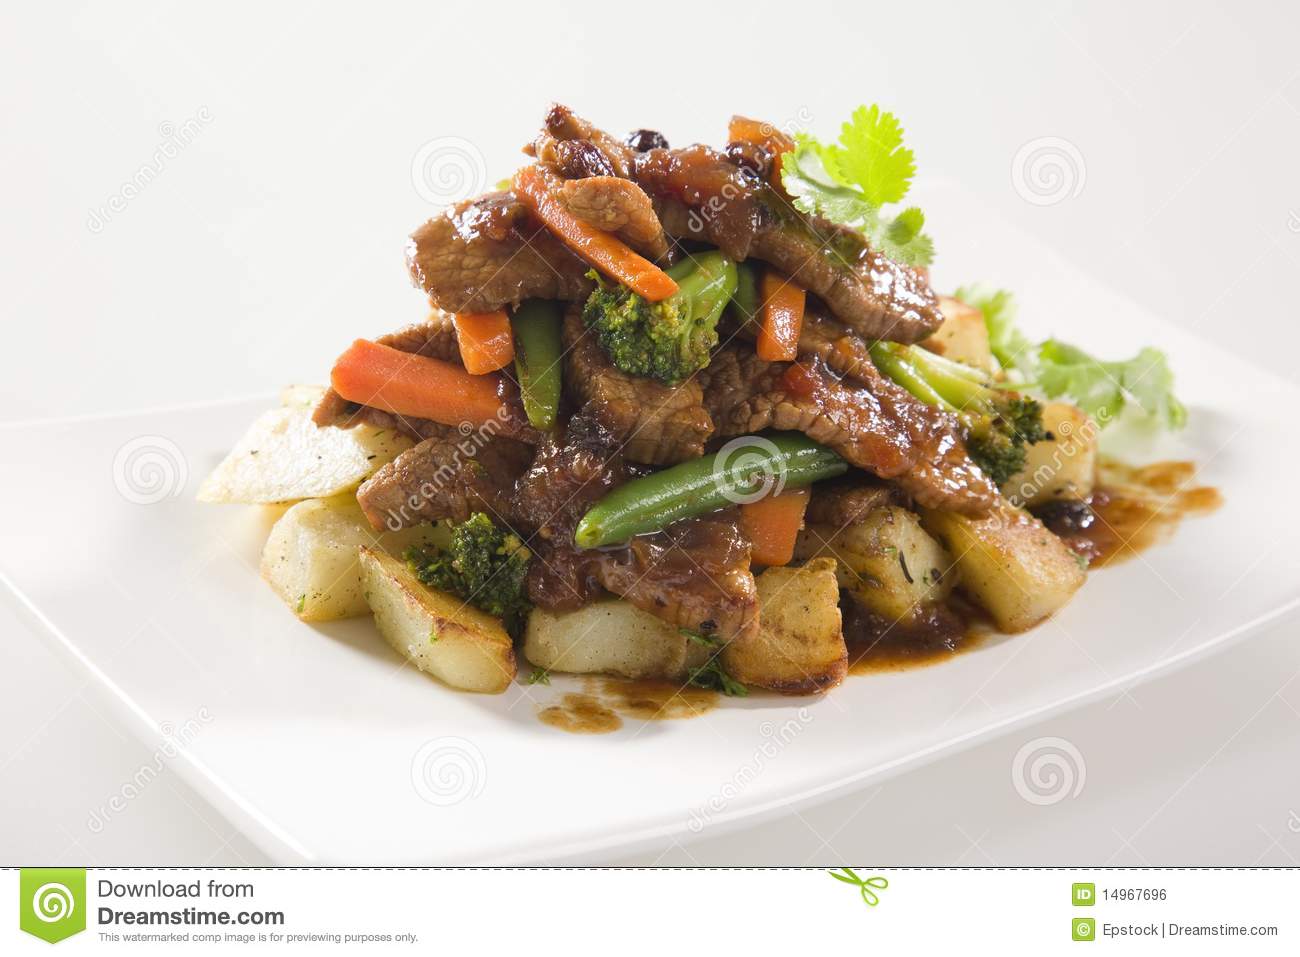 Beef Stir Fry With Potatoes Royalty Free Stock Image   Image  14967696